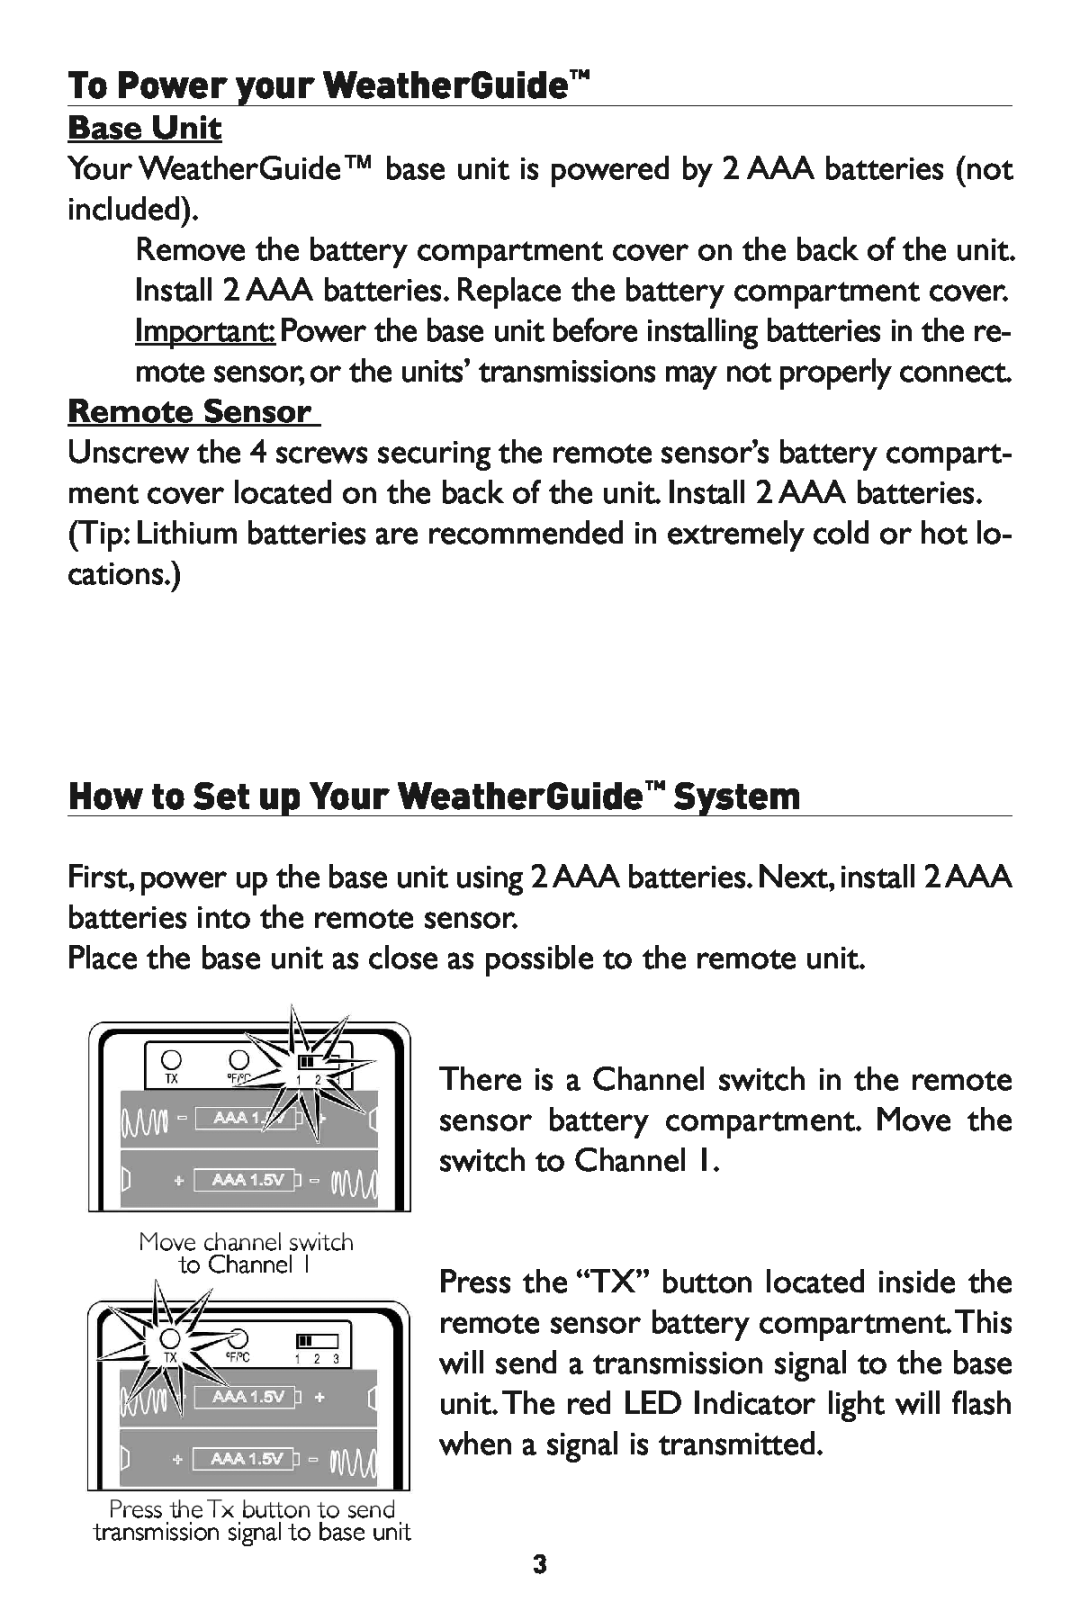 Taylor 1526 instruction manual HowBase toUnitSet up Your WeatherGuide System, Remote S nsor 